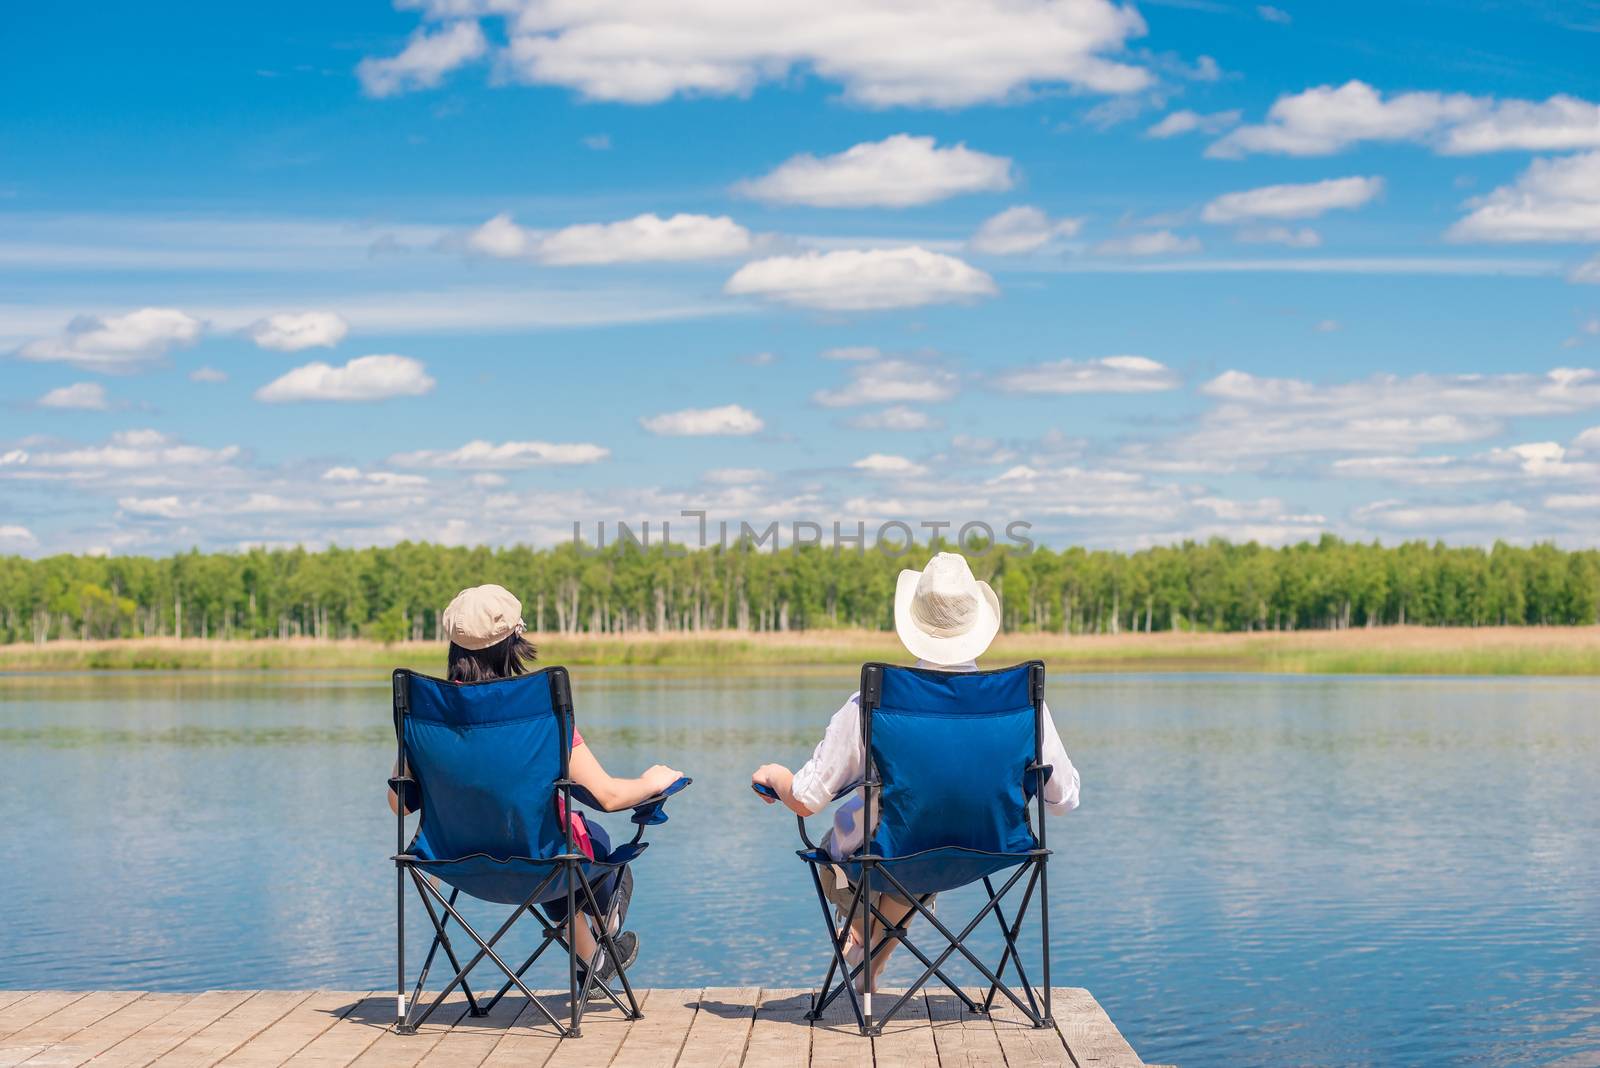 a married couple sitting on chairs near a picturesque lake on a by kosmsos111